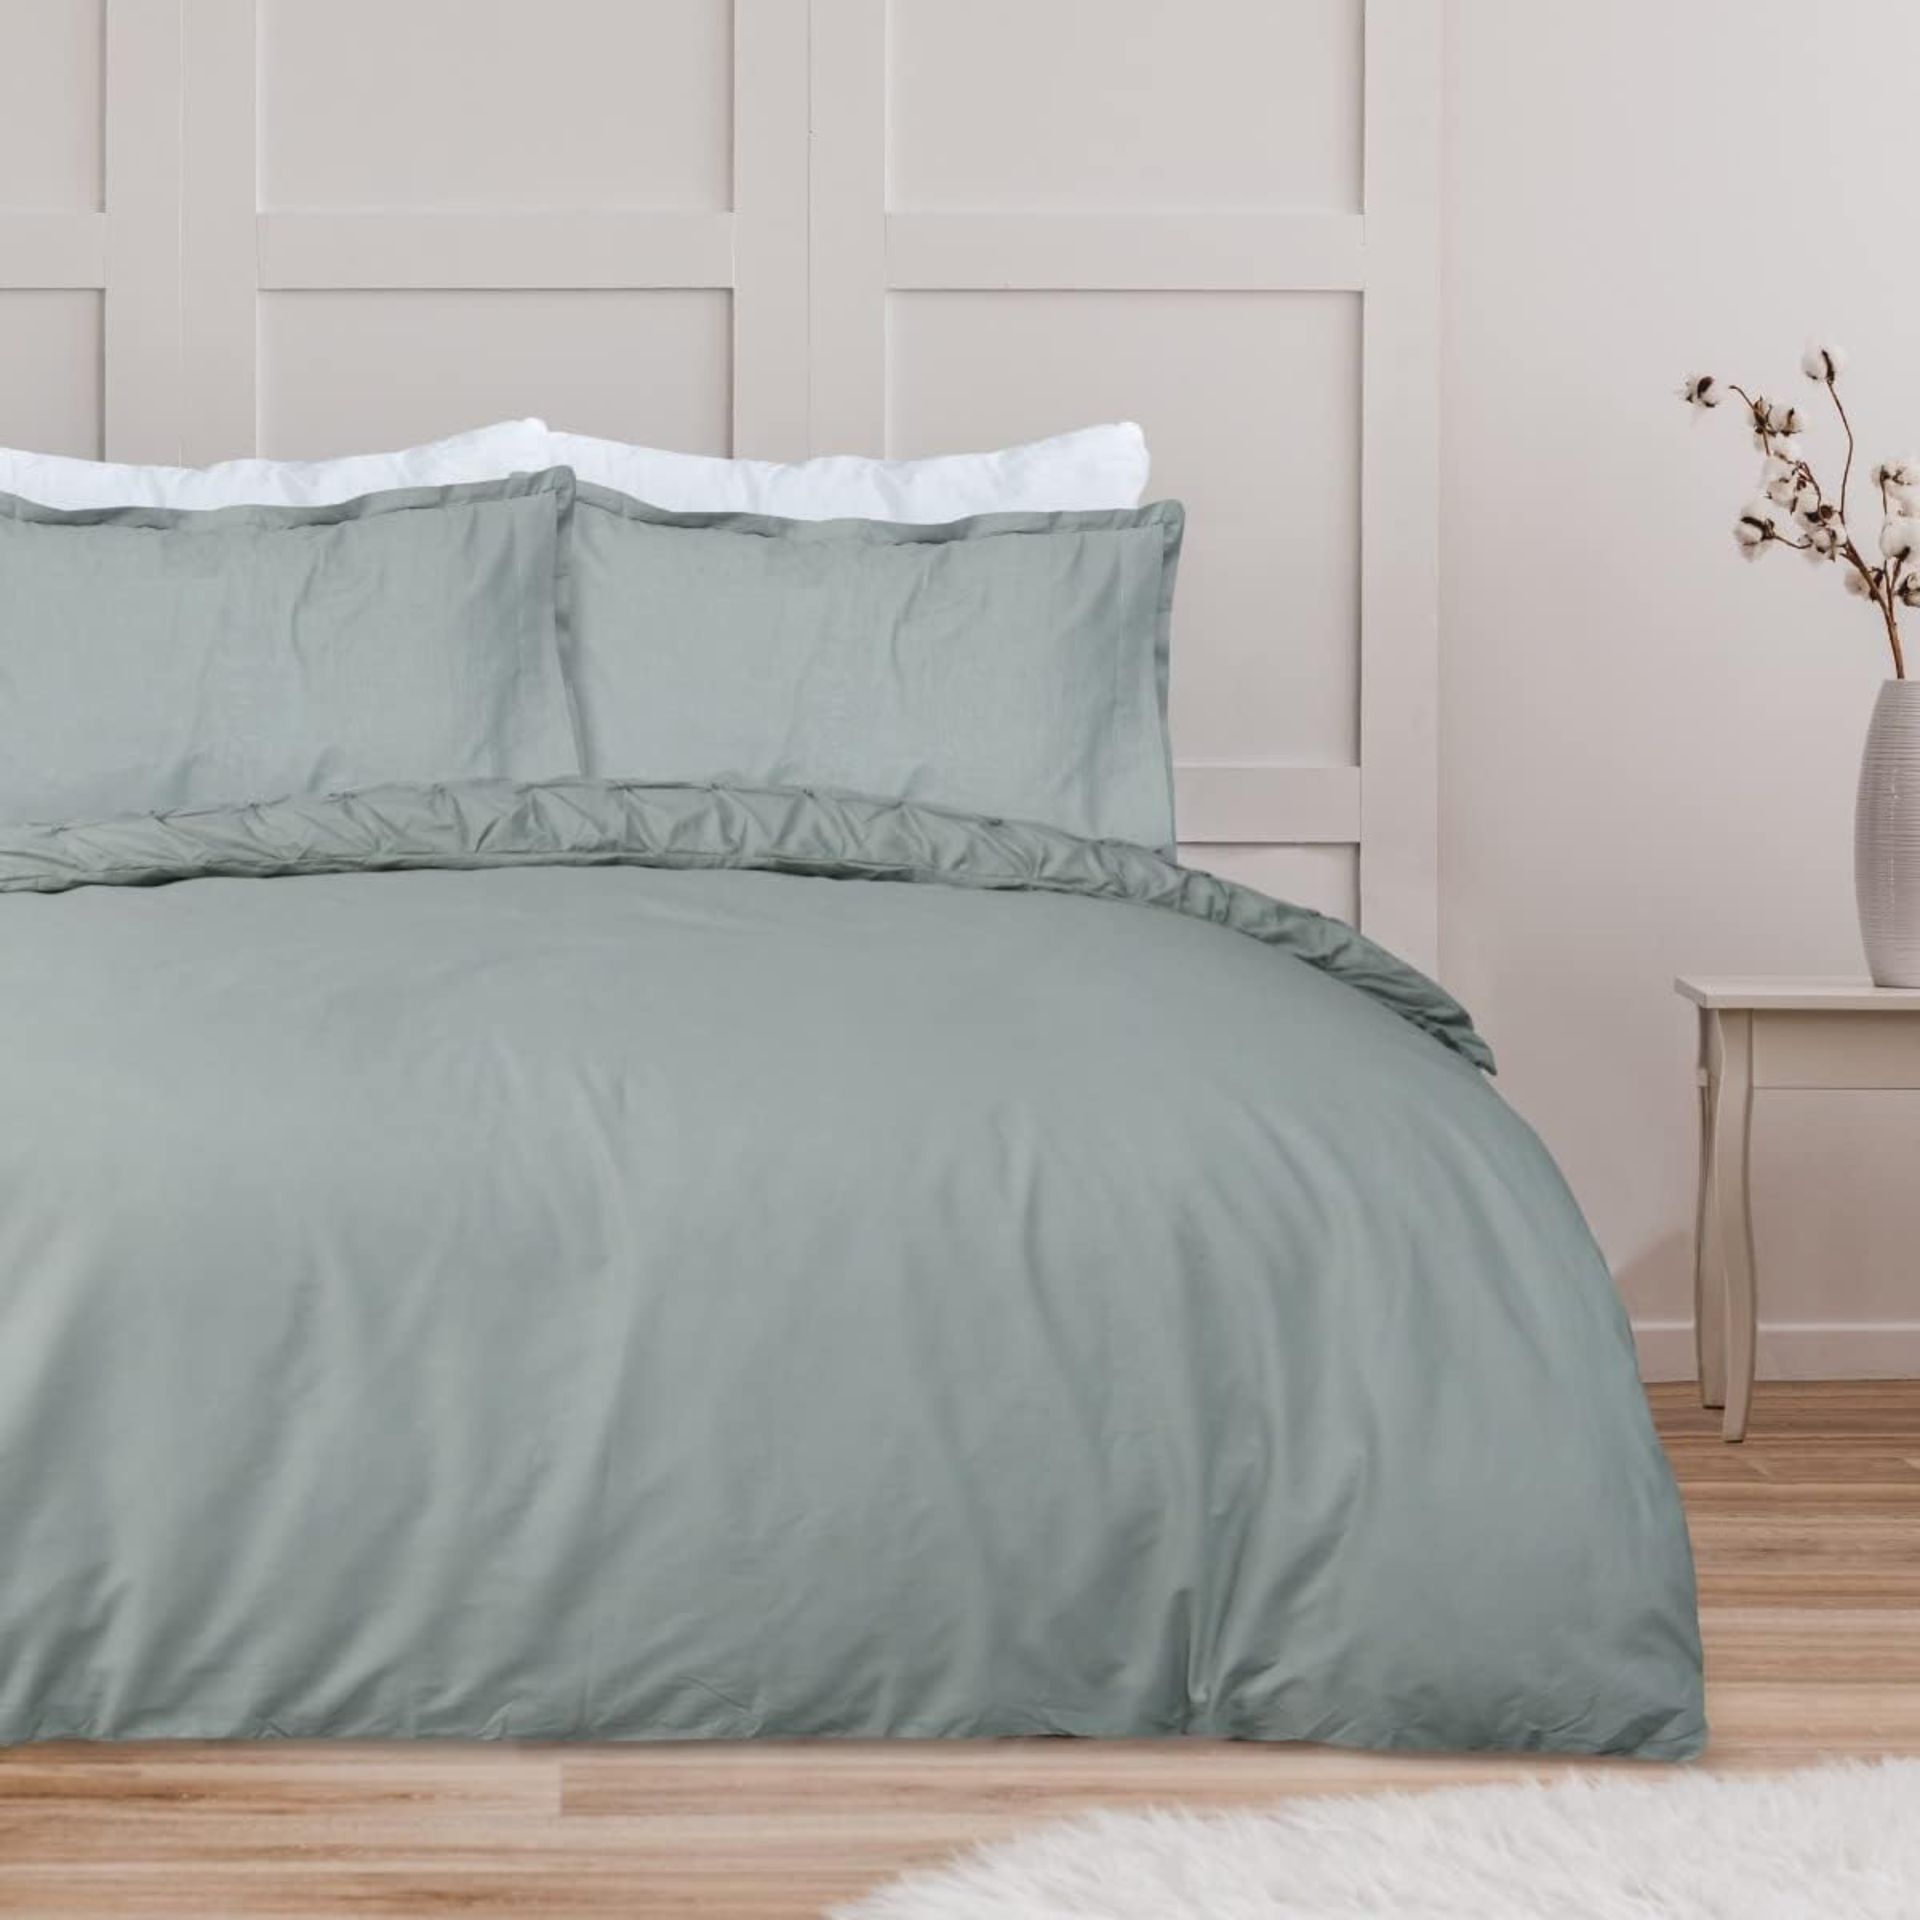 11x NEW & PACKAGED SLEEPDOWN Rouched Easy Care SINGLE Duvet Set - SAGE GREEN. RRP £22.99 EACH. (R7- - Image 5 of 7